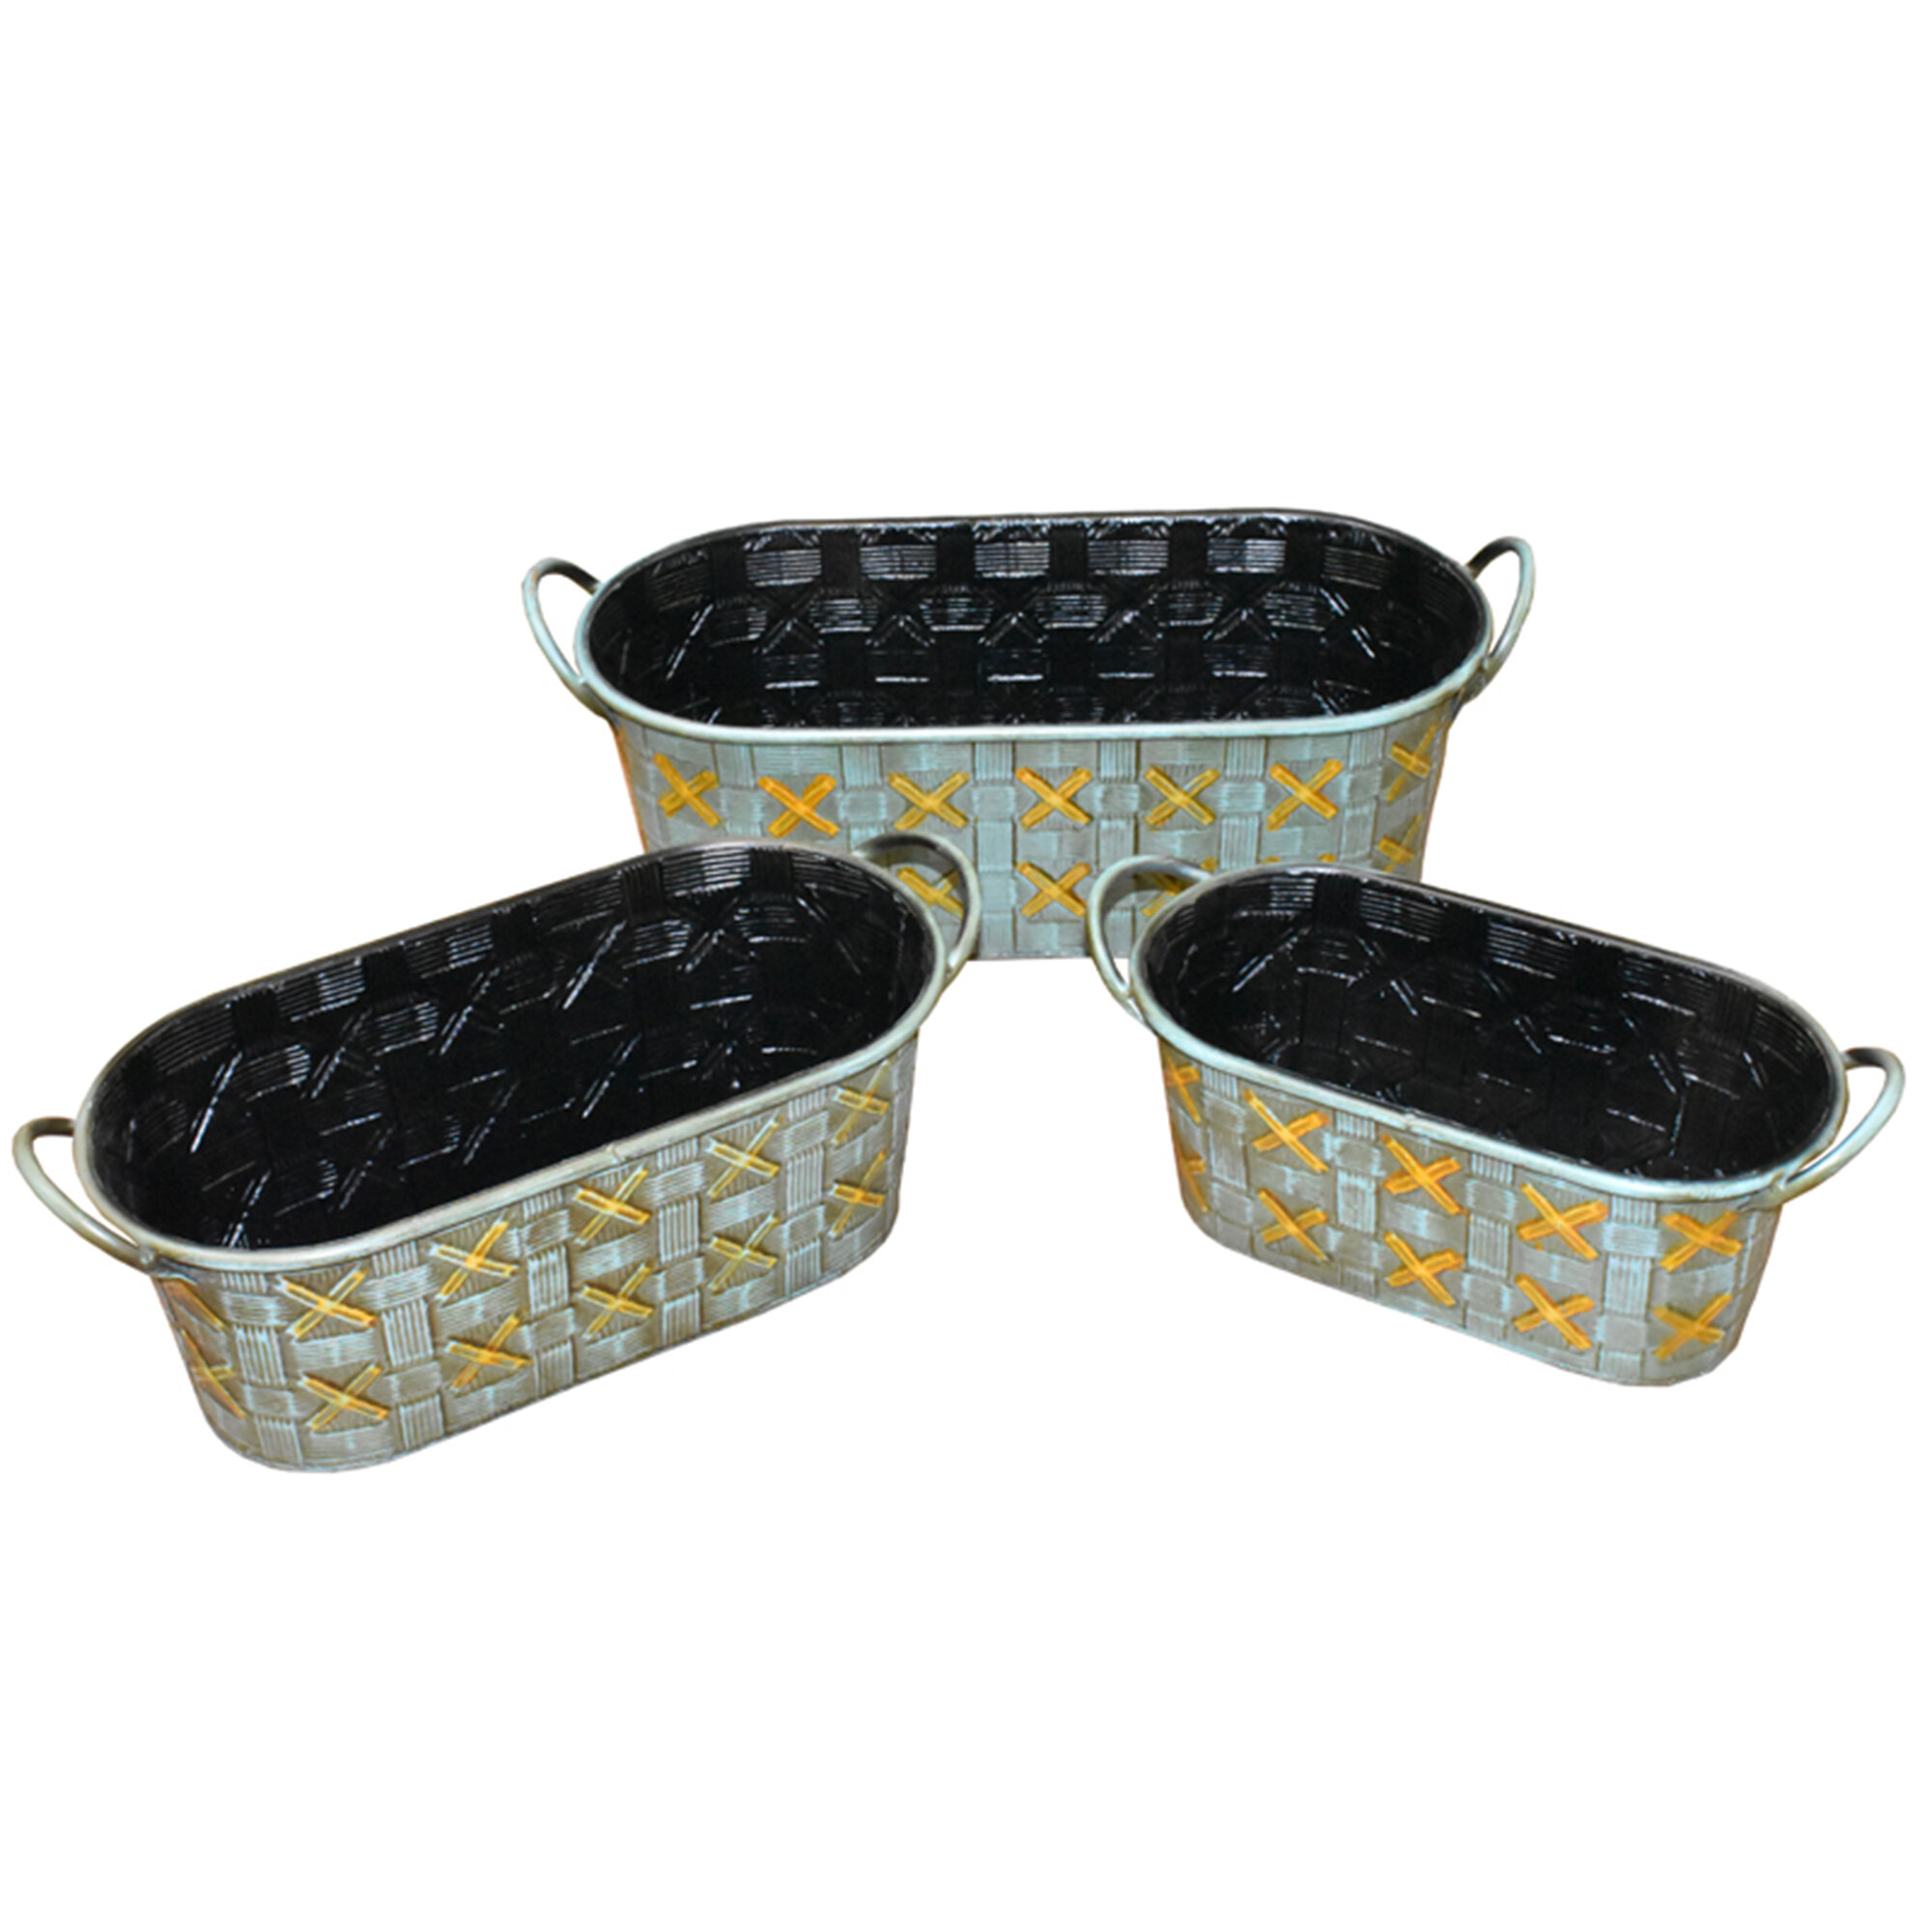 Sego Decorative Round Metal Buckets with Handles and Flower Market Text